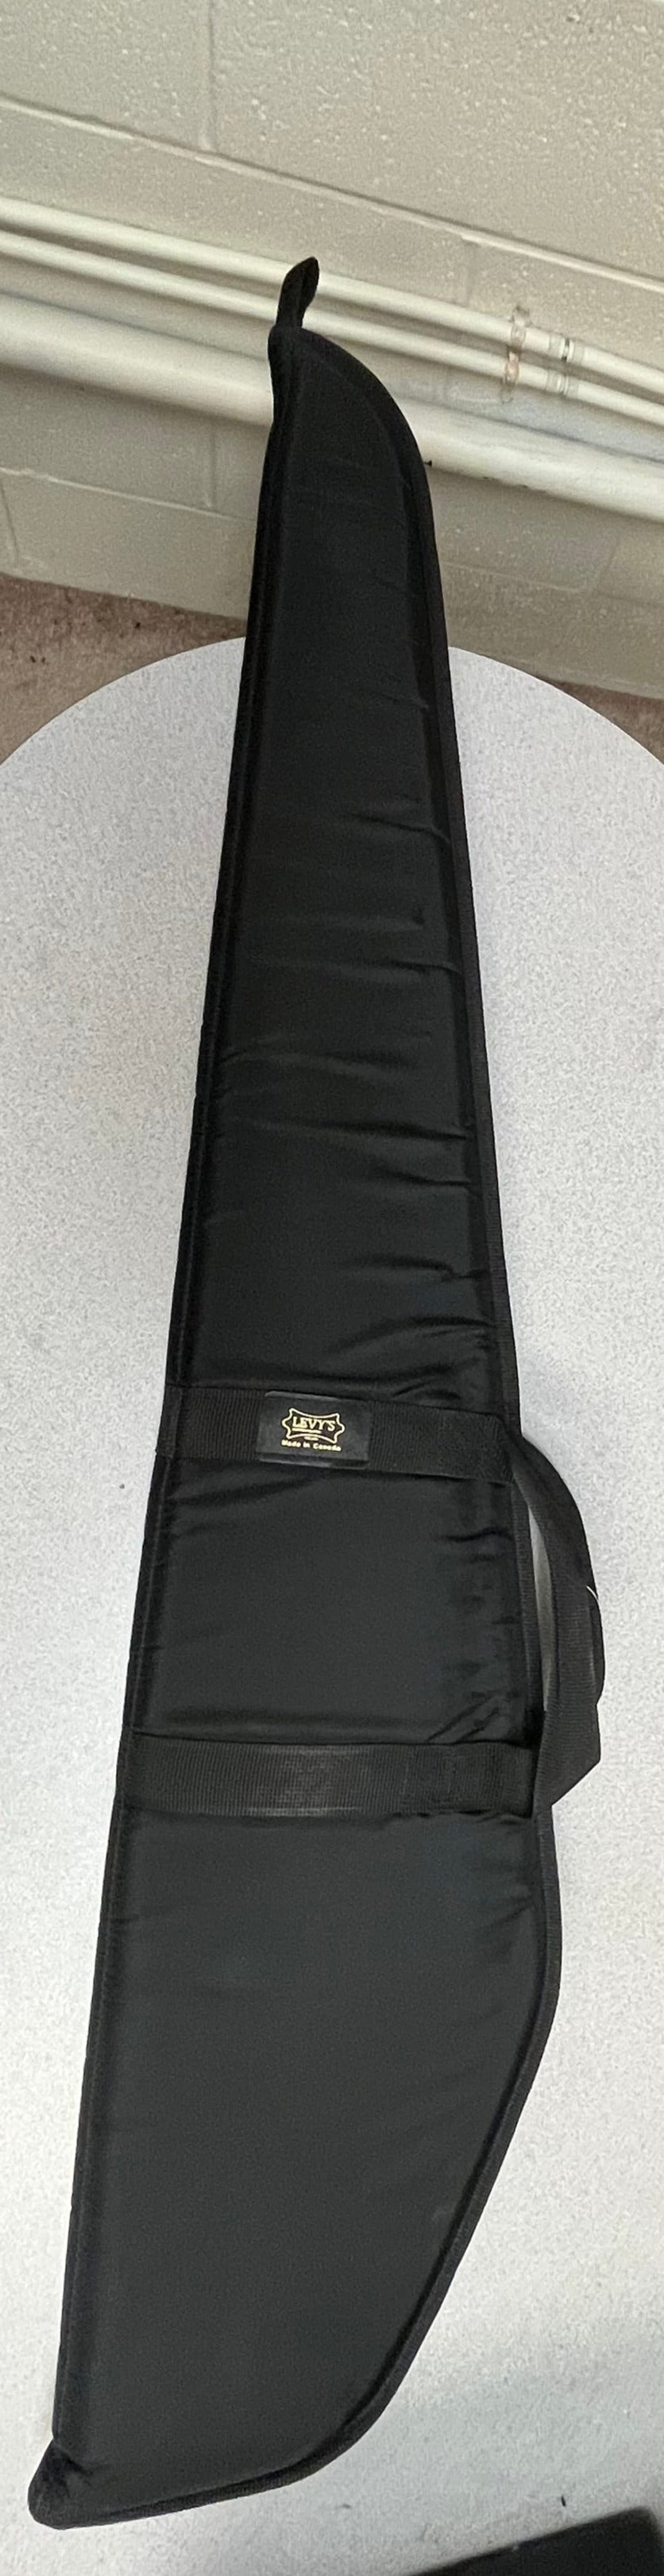 Levy's Soft Shell Rifle Case